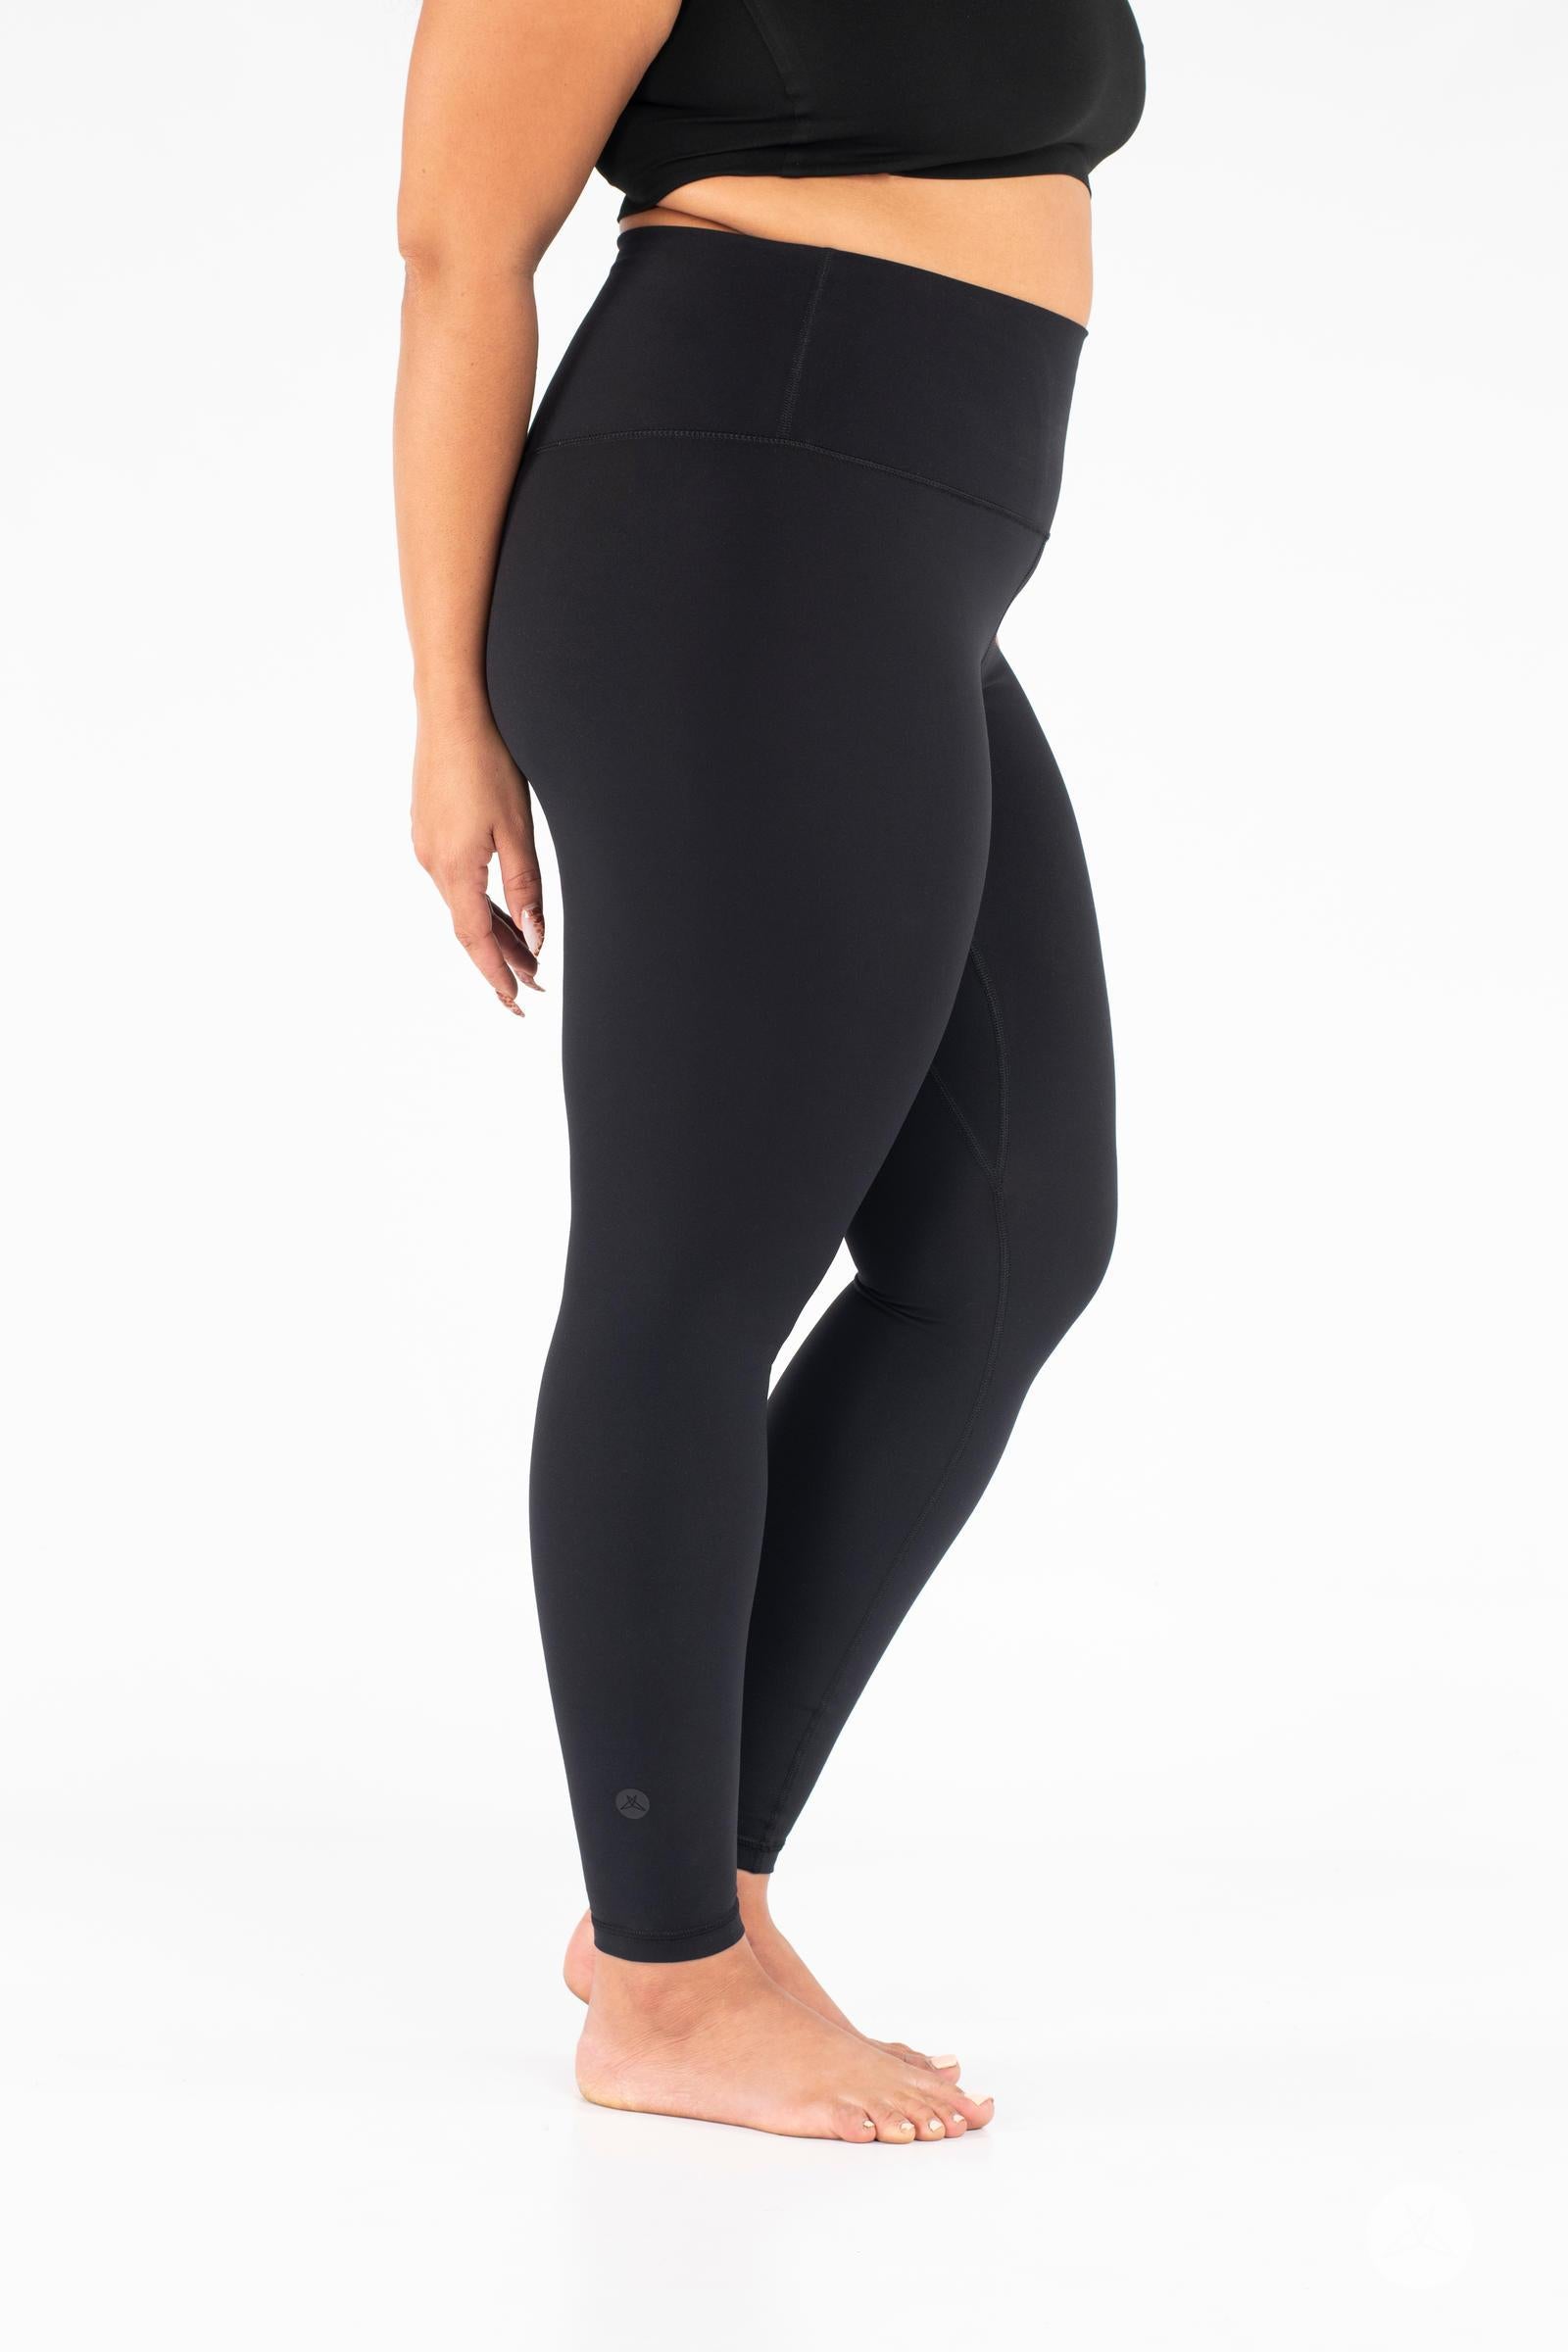 Activewear Gym Tights Leggings Free Size